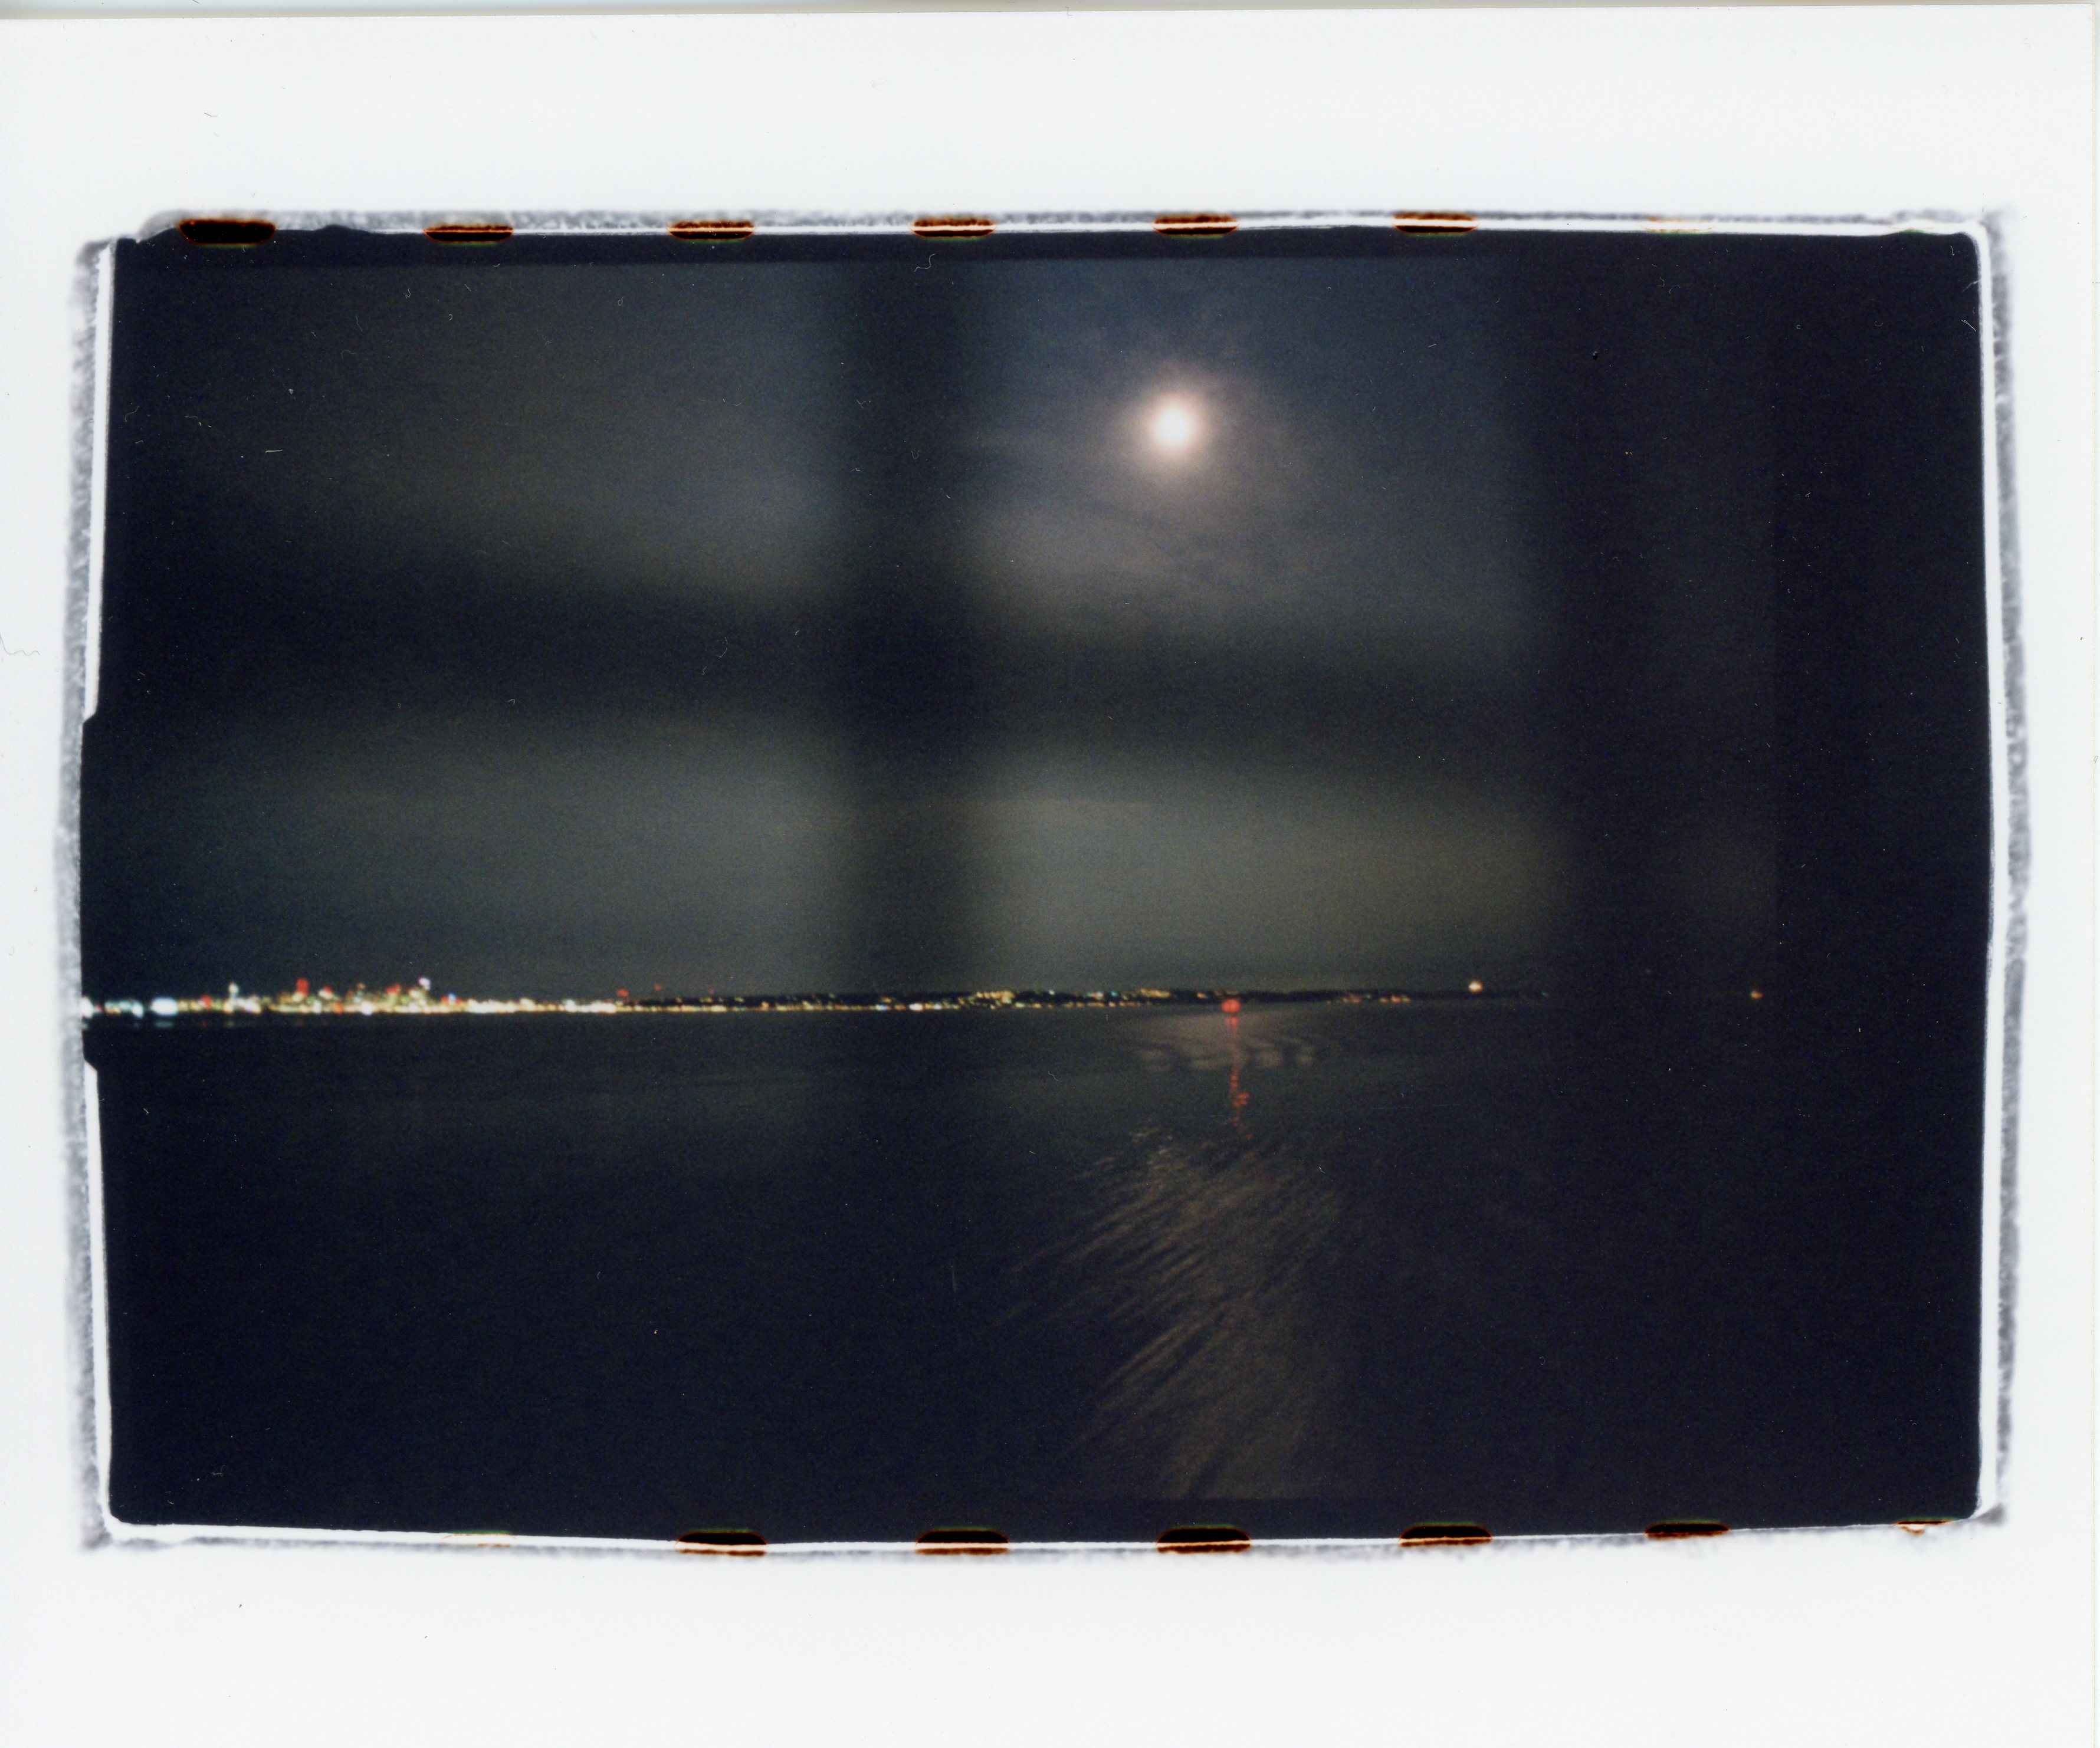 a 35mm color print with messy edges that show bits of the sprocket holes; out of focus directly in front of the camera is a grid mesh on the railings of a ferry; the sky is overcast, but the moon is visible; the sky takes up slightly more than half the top of the frame; there is a thin strip of land between the sky and the water populated by dense lights on the left that dim and disappear on the right side; the moon shines off the waves in the water, which curve towards the land